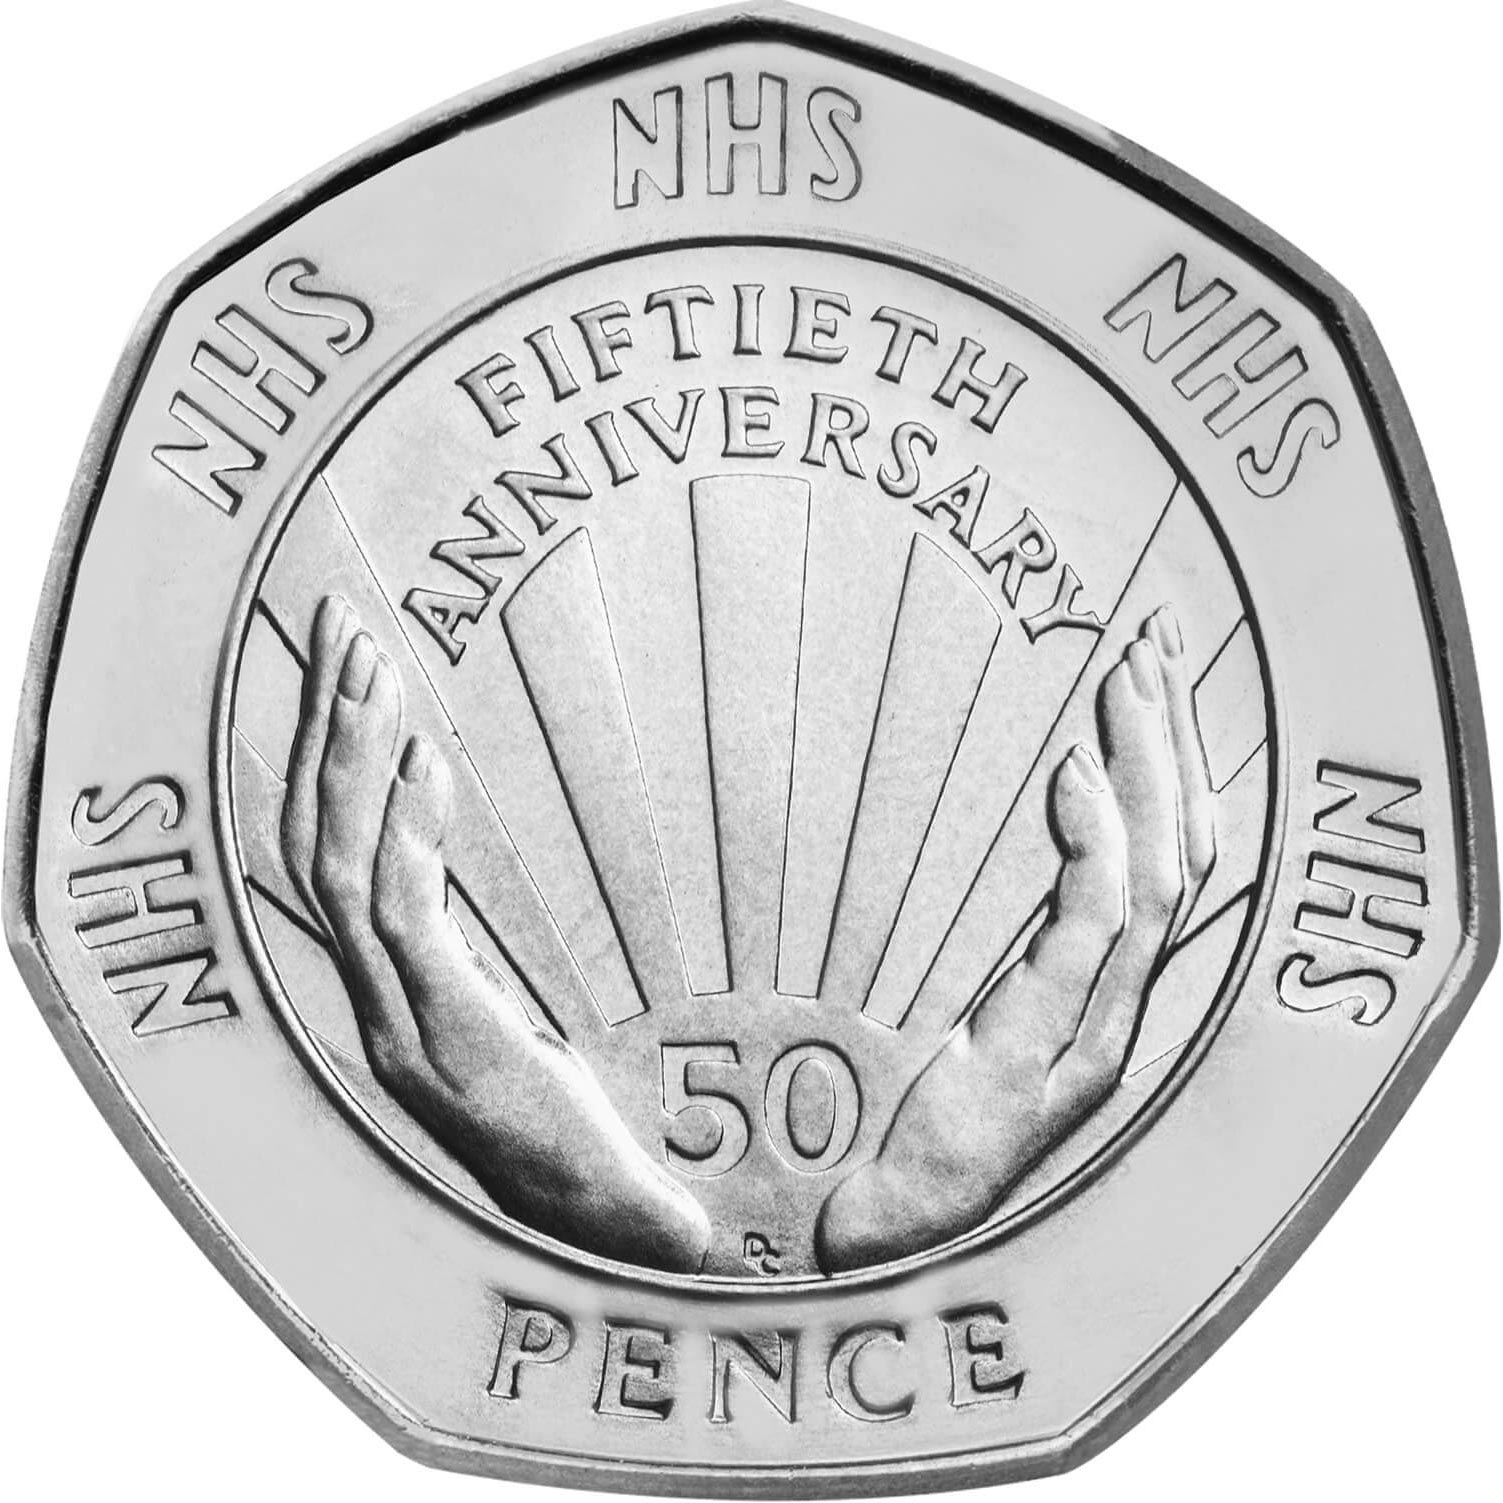 Image of 50 pence coin - 50th Anniversary of the National Health Service | United Kingdom 1998.  The Copper–Nickel (CuNi) coin is of UNC quality.